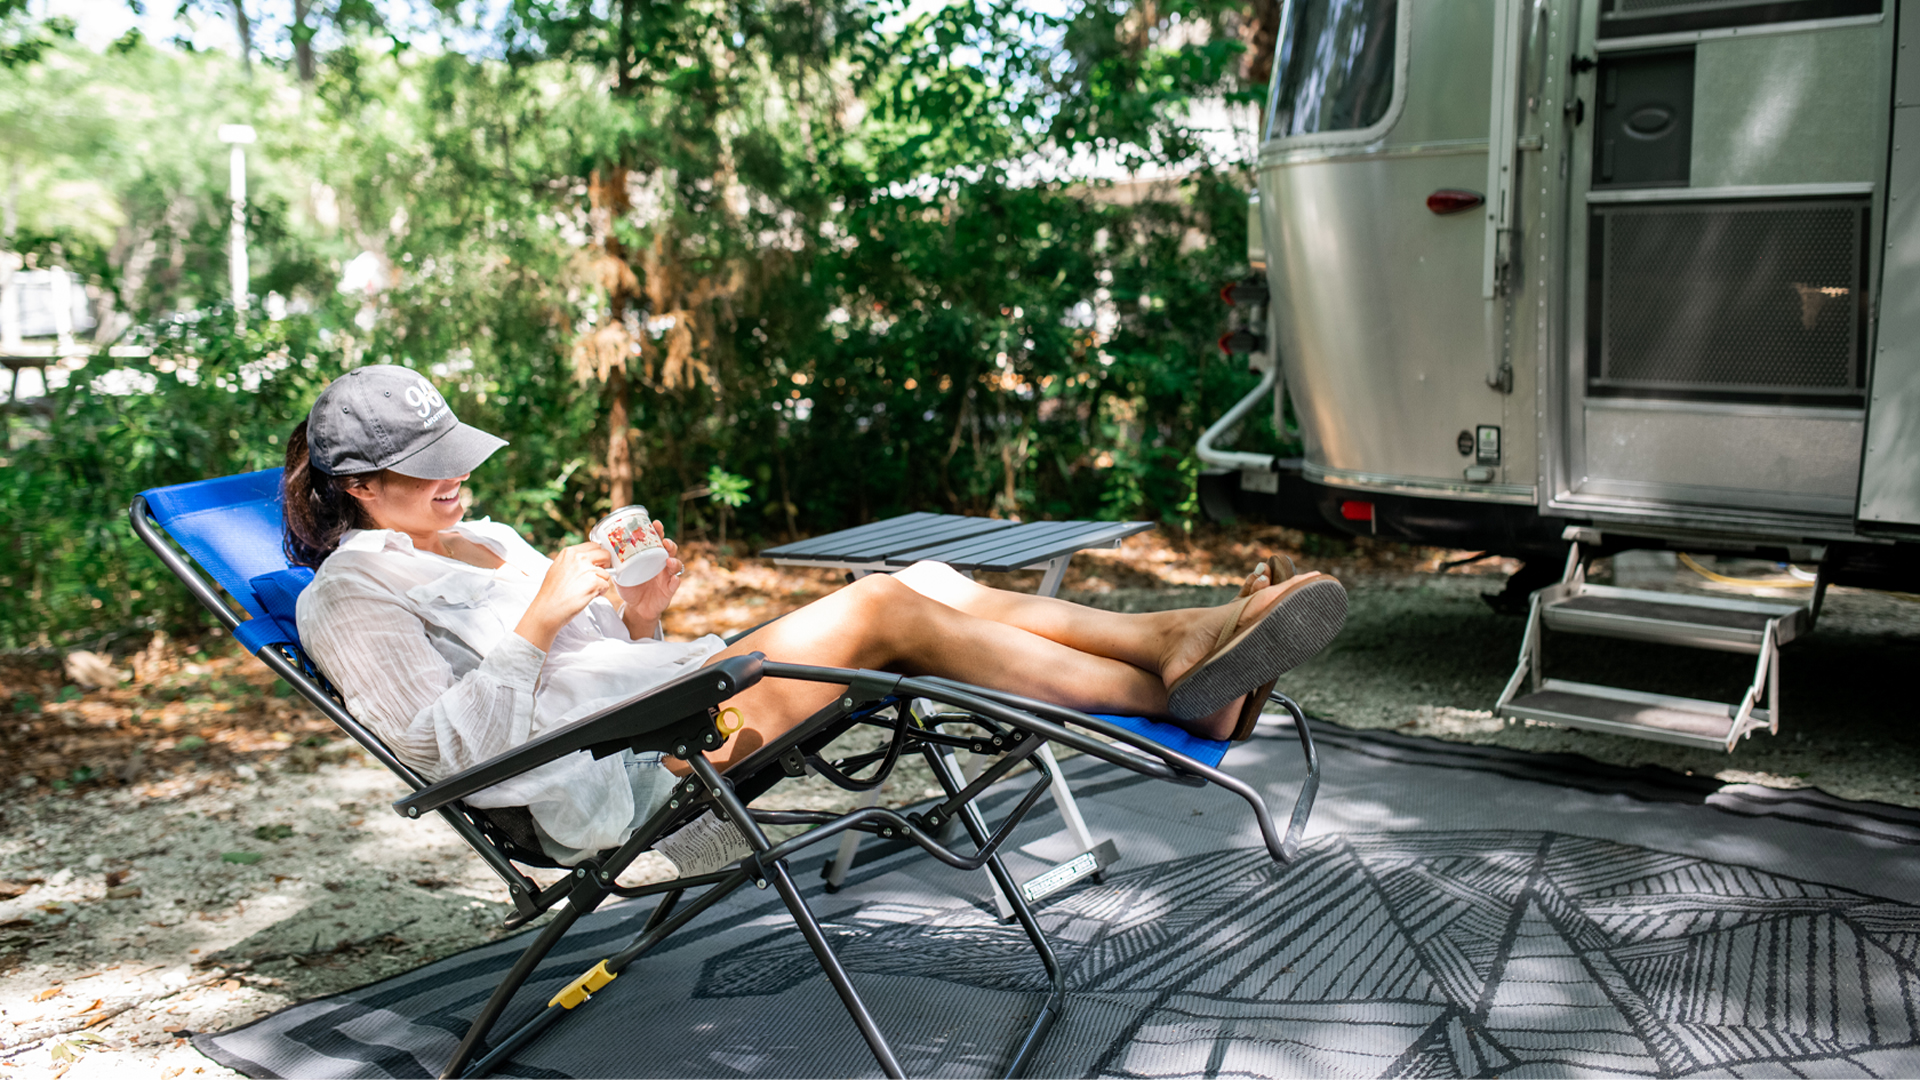 Danielle sitting in a lawn chair next to her Airstream Travel Trailer at a campground